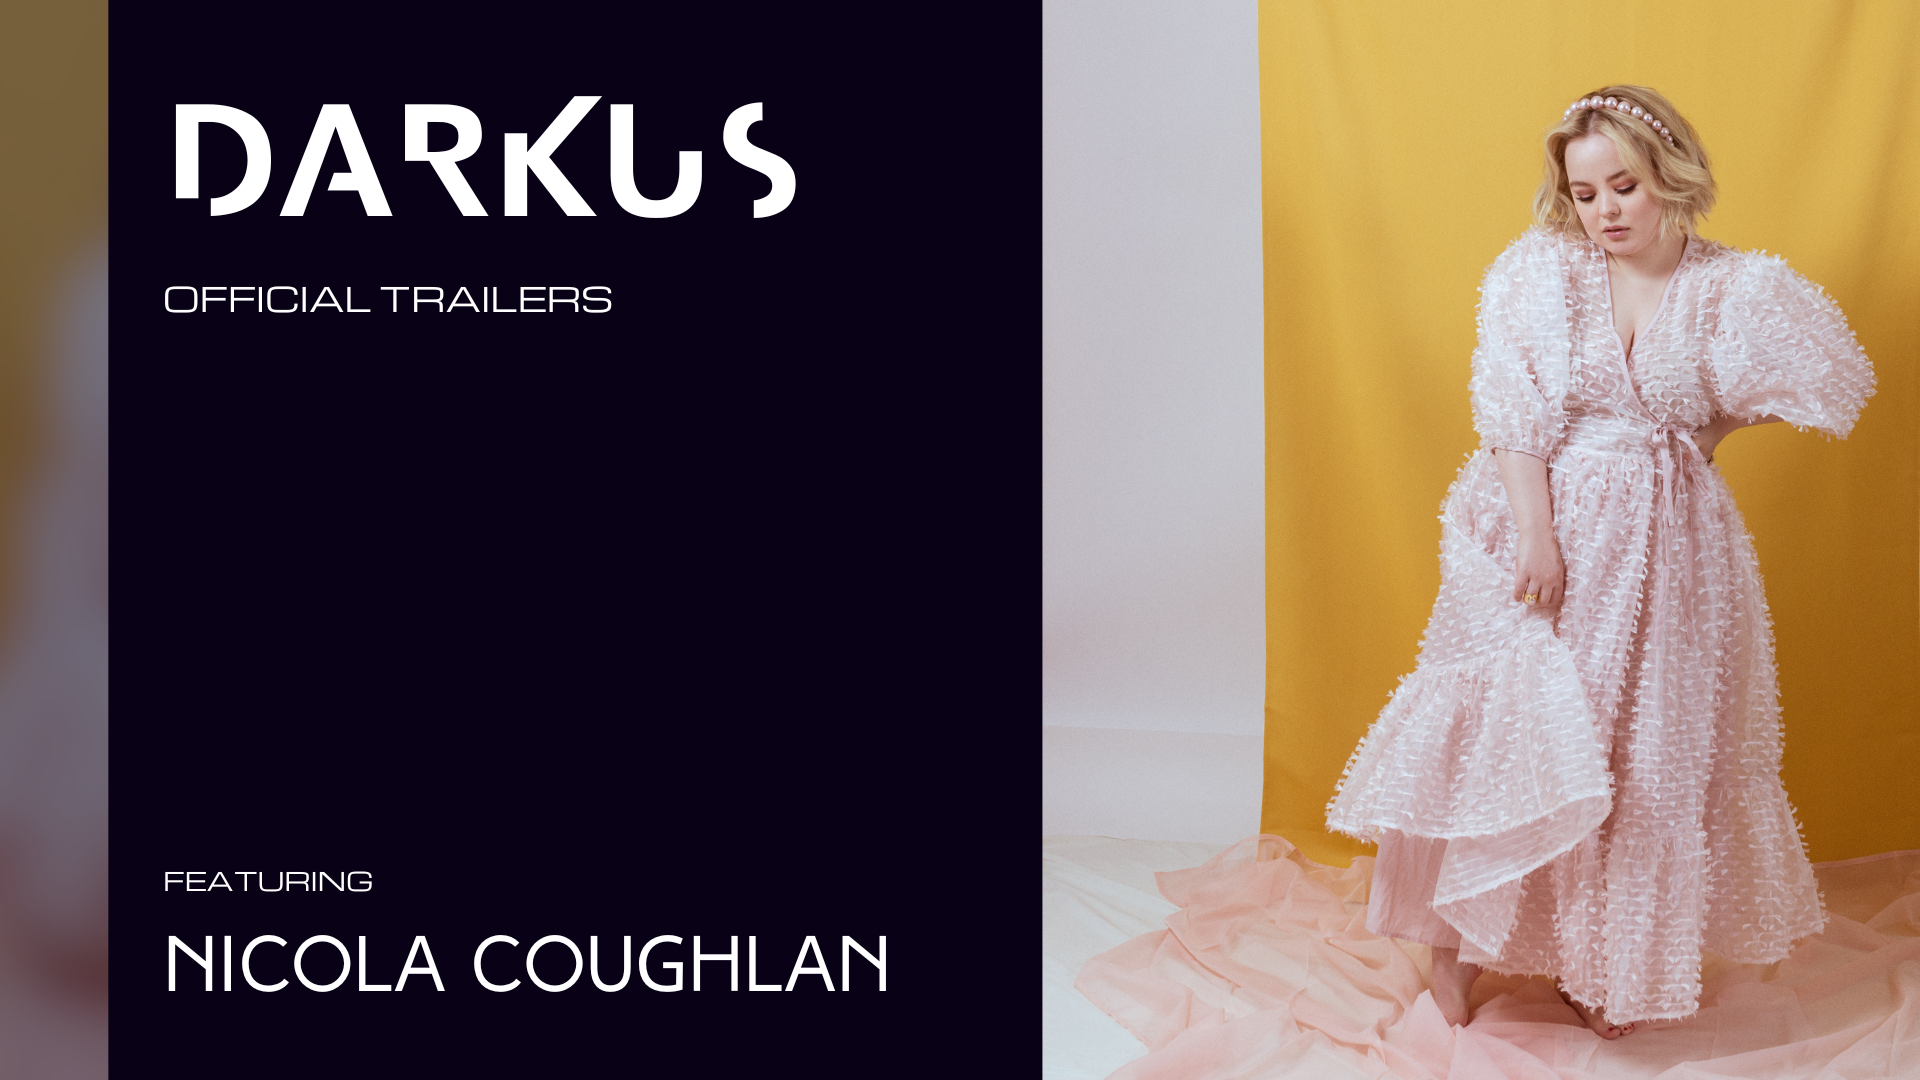 DARKUS OFFICIAL TRAILERS: FEATURING NICOLA COUGHLAN